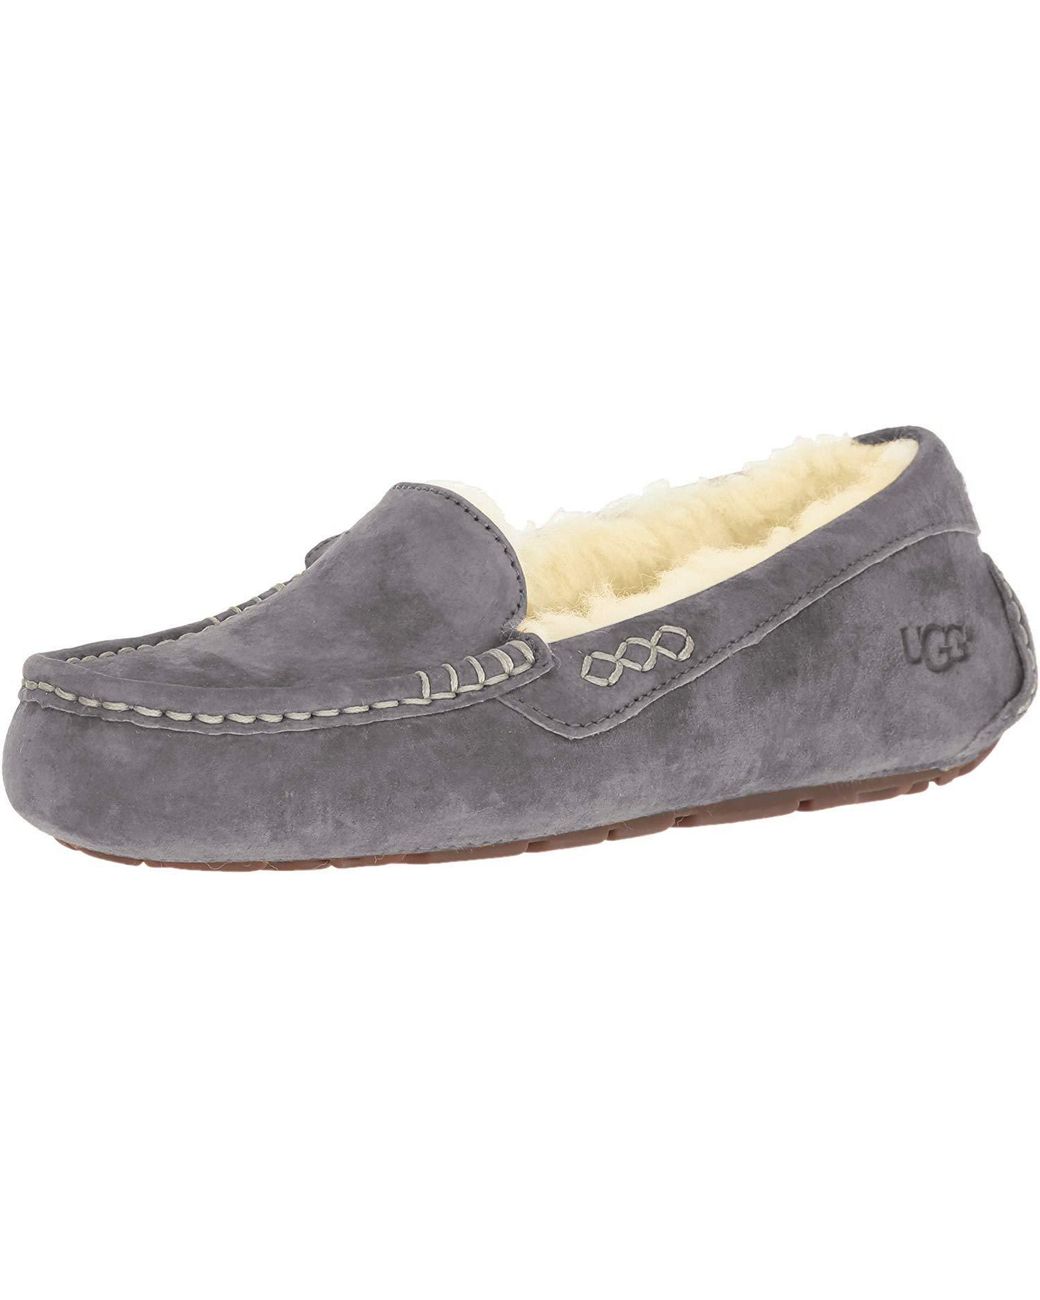 UGG Suede Ansley in Grey (Gray) - Save 41% - Lyst